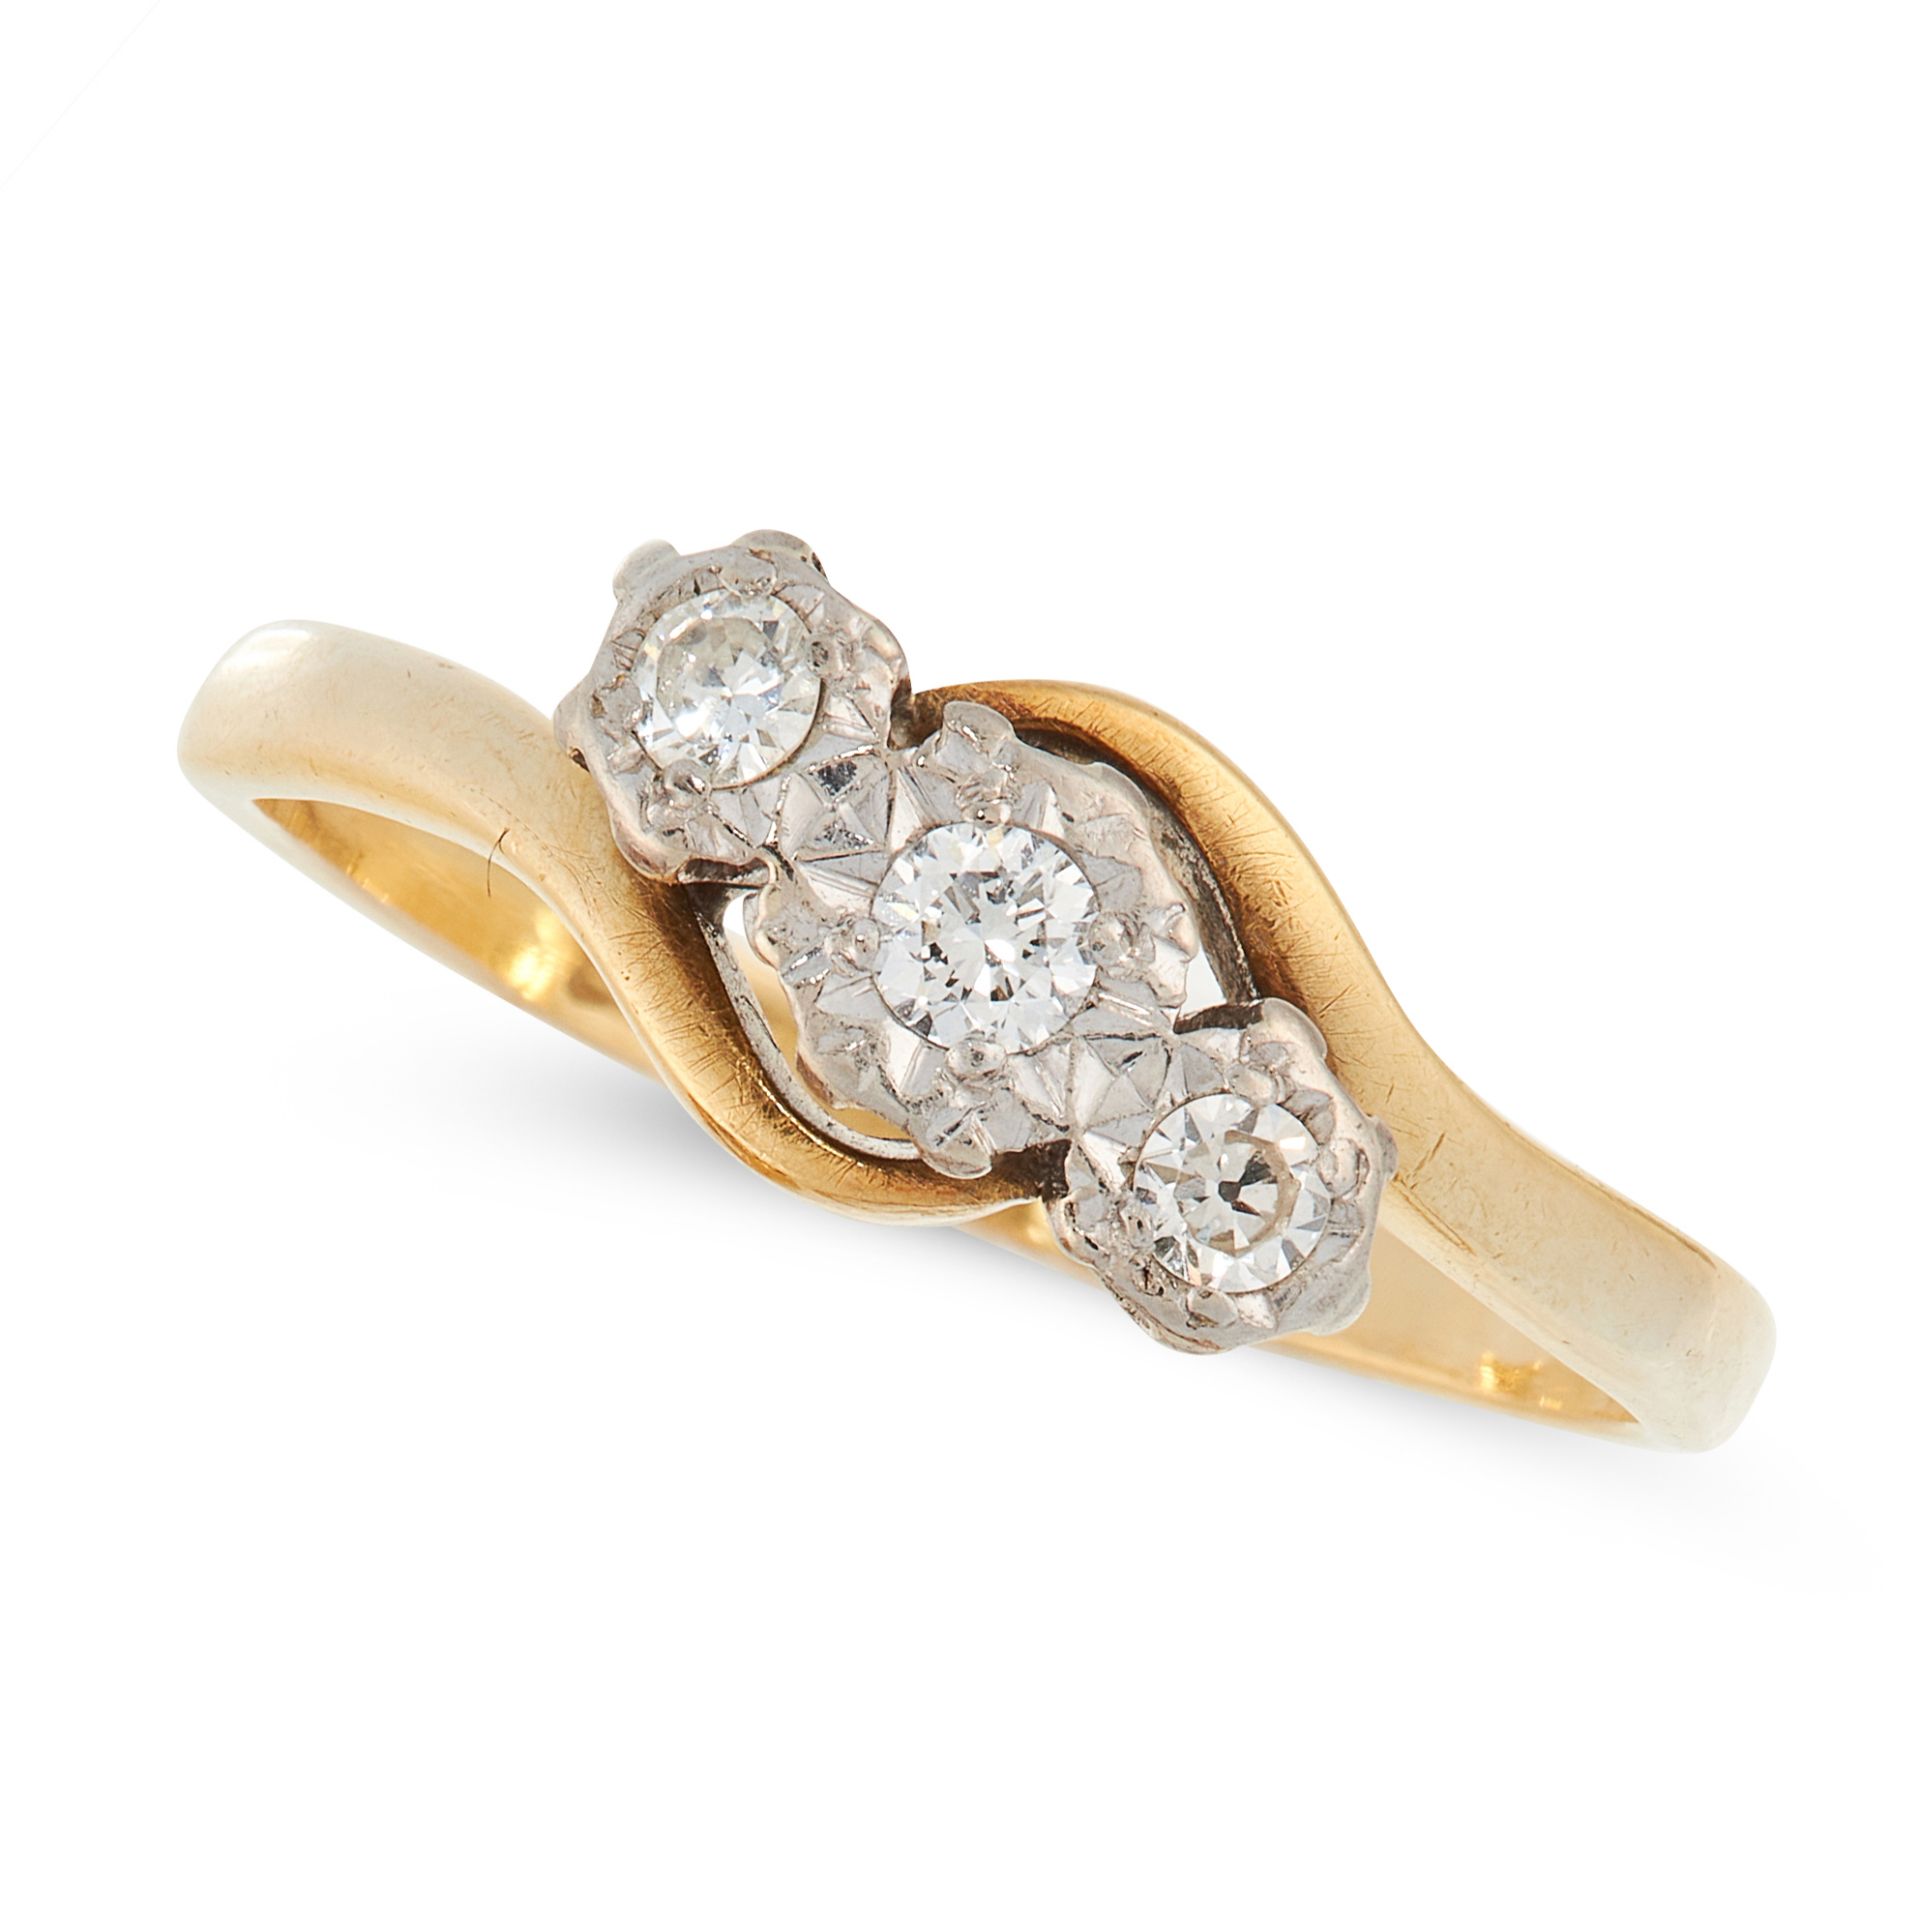 A DIAMOND THREE STONE RING in 18ct yellow gold, the twisted shank is set with a trio of round cut